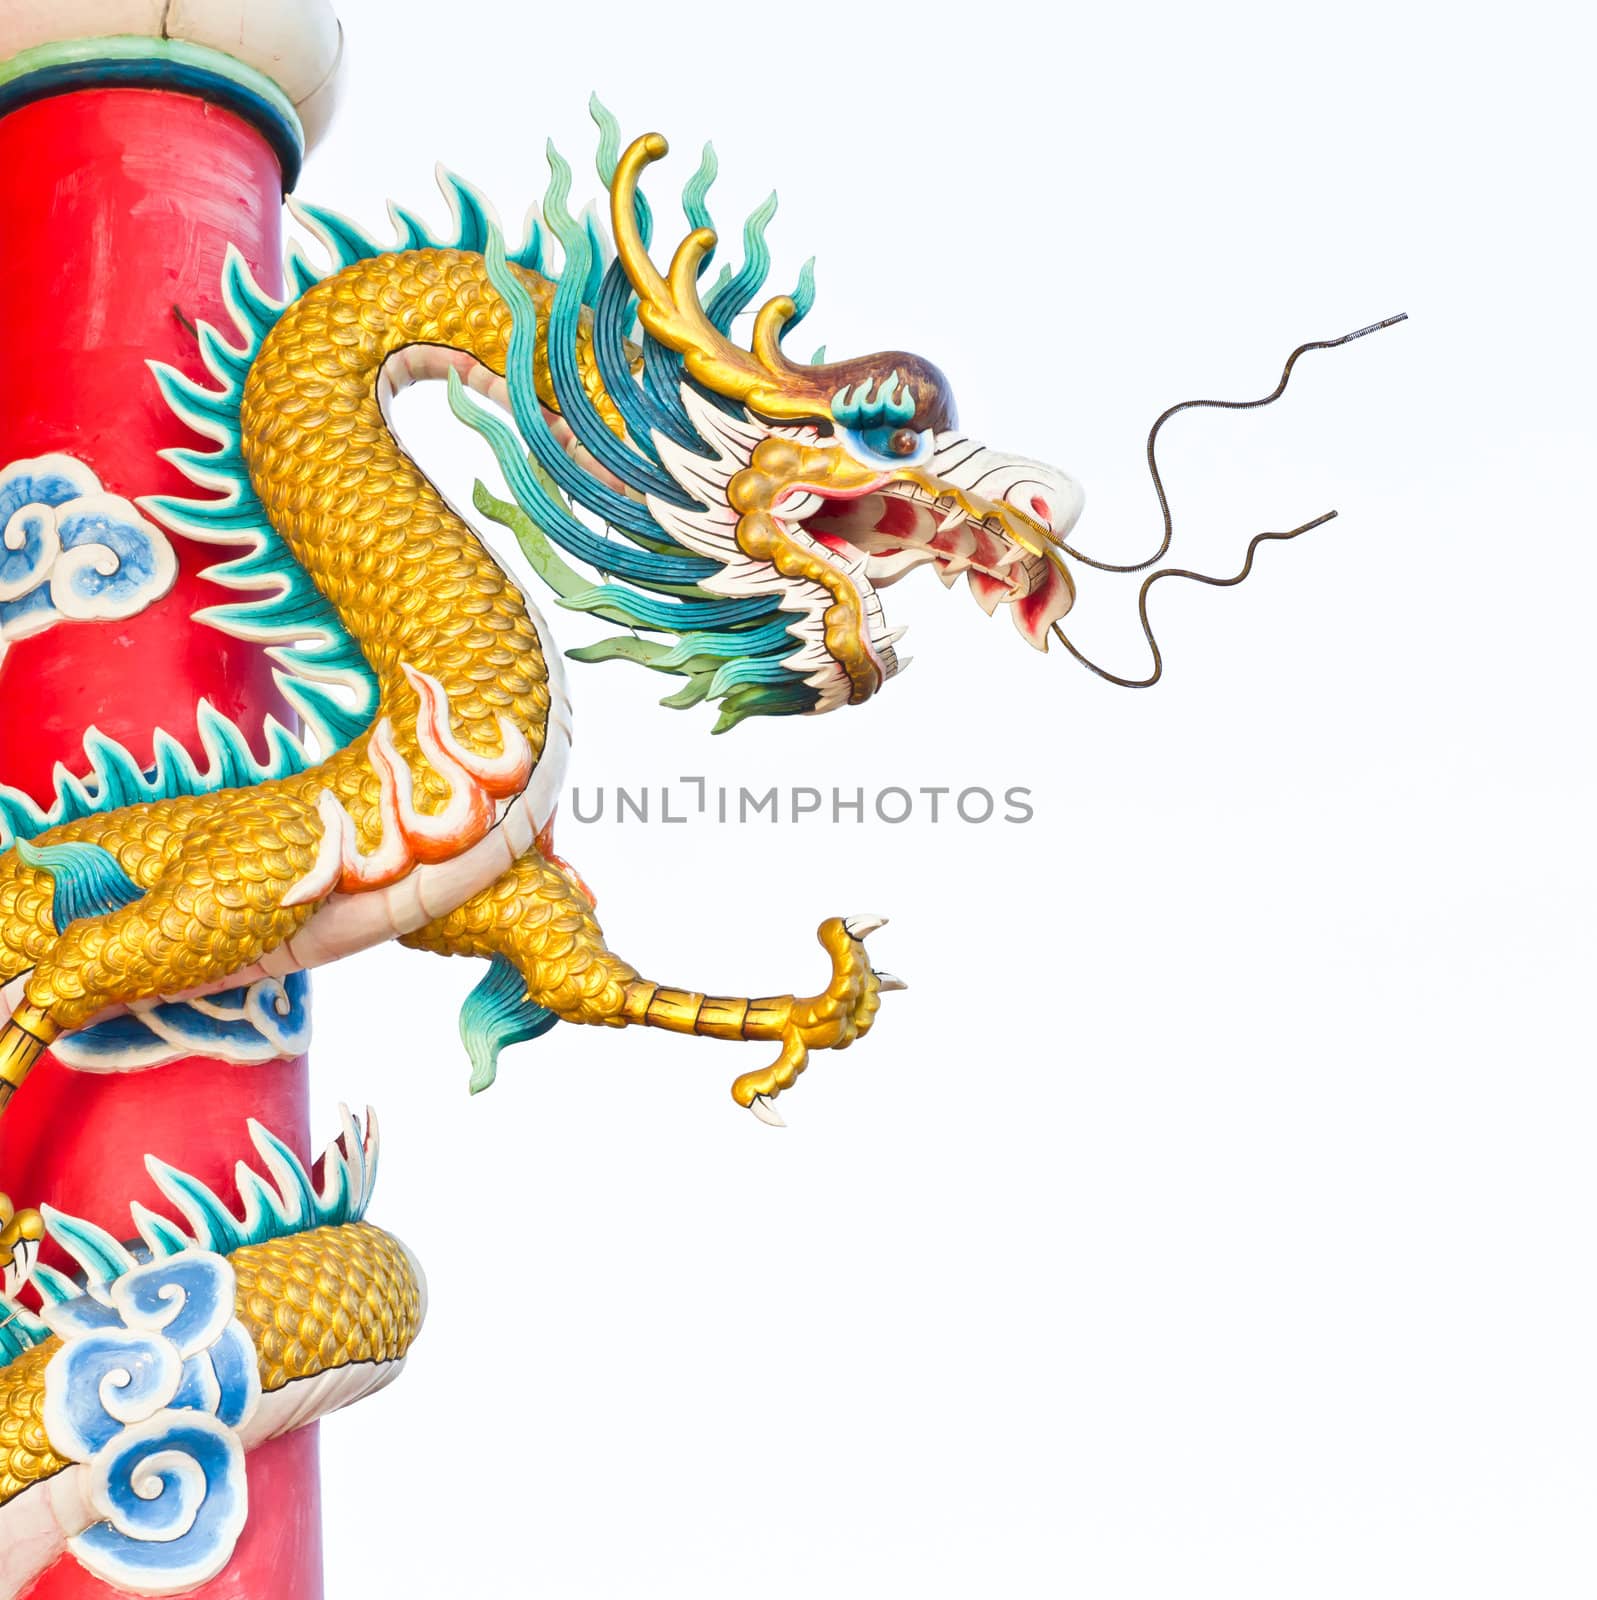 dragon statue in chinese temple by tungphoto